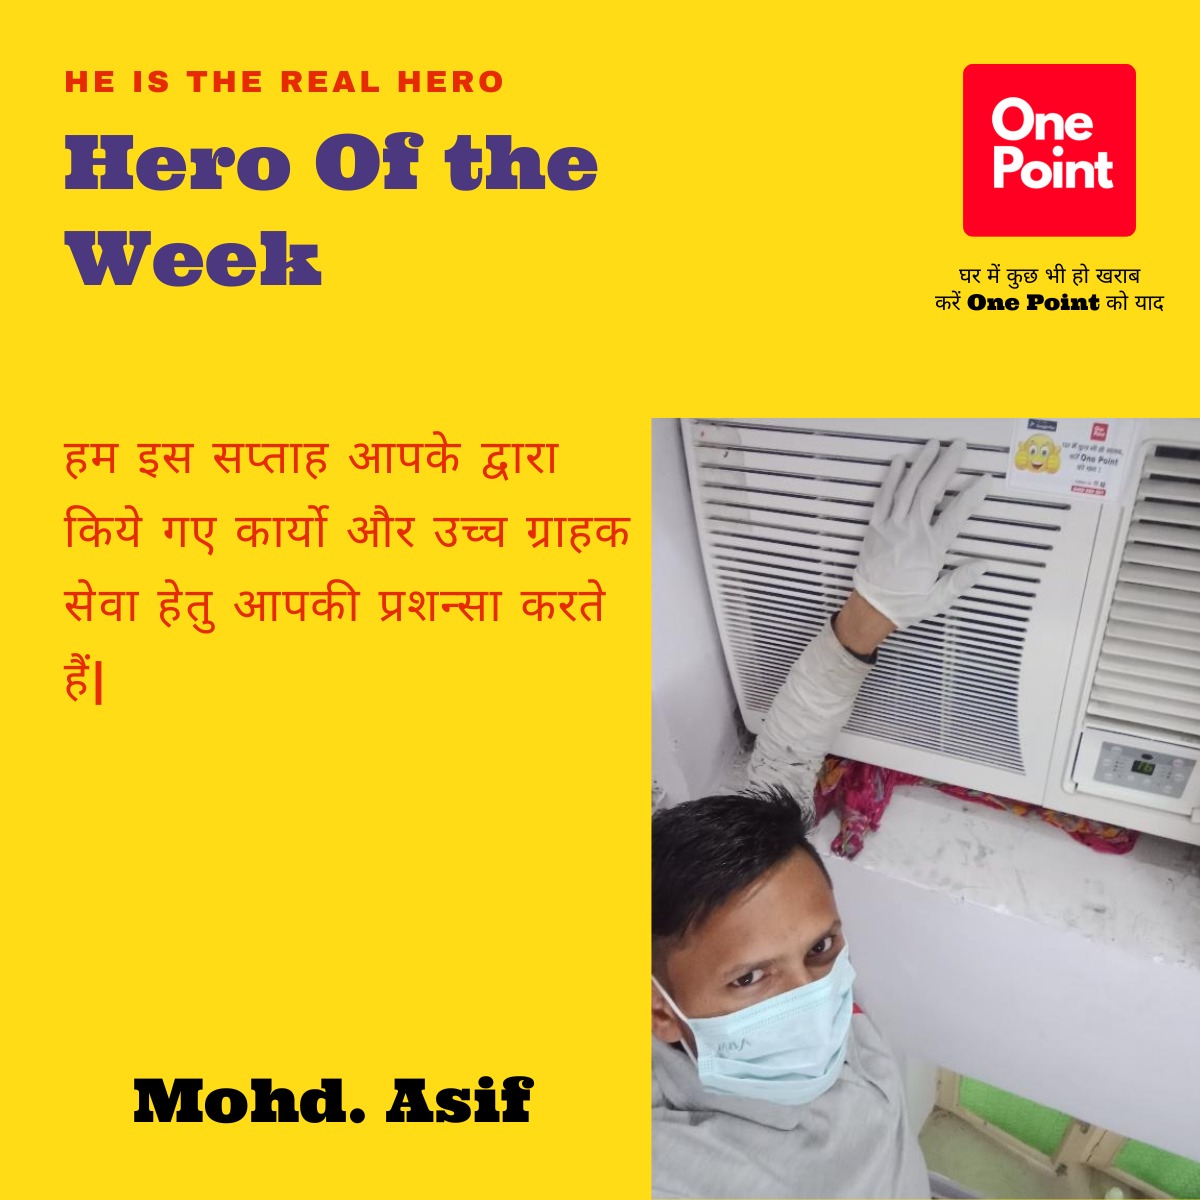 🎉👨‍🔧 CONGRATS to Mr. Asif, our Home Appliance Repair #HeroOfTheWeek! 👏🏆 Your dedication and expertise in providing exceptional repair services make you a true🦸‍♂️
For Booking, Download our Customer App
👇 👇 👇
play.google.com/store/apps/det…

#OnePointServices #HomeApplianceRepair